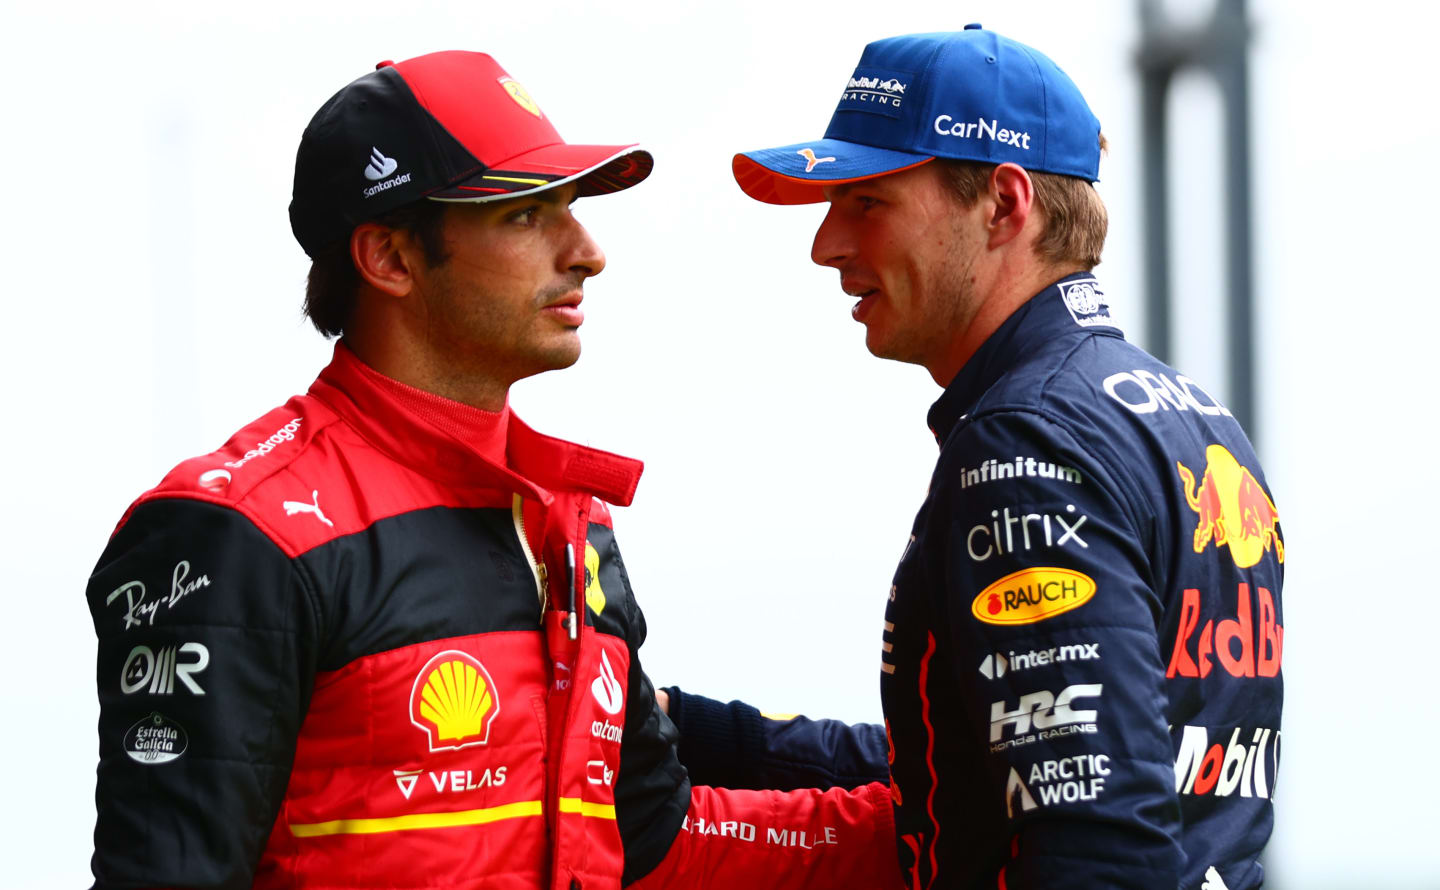 SPA, BELGIUM - AUGUST 27: Pole position qualifier Max Verstappen of the Netherlands and Oracle Red Bull Racing and Second placed qualifier Carlos Sainz of Spain and Ferrari talk in parc ferme during qualifying ahead of the F1 Grand Prix of Belgium at Circuit de Spa-Francorchamps on August 27, 2022 in Spa, Belgium. (Photo by Dan Istitene - Formula 1/Formula 1 via Getty Images)